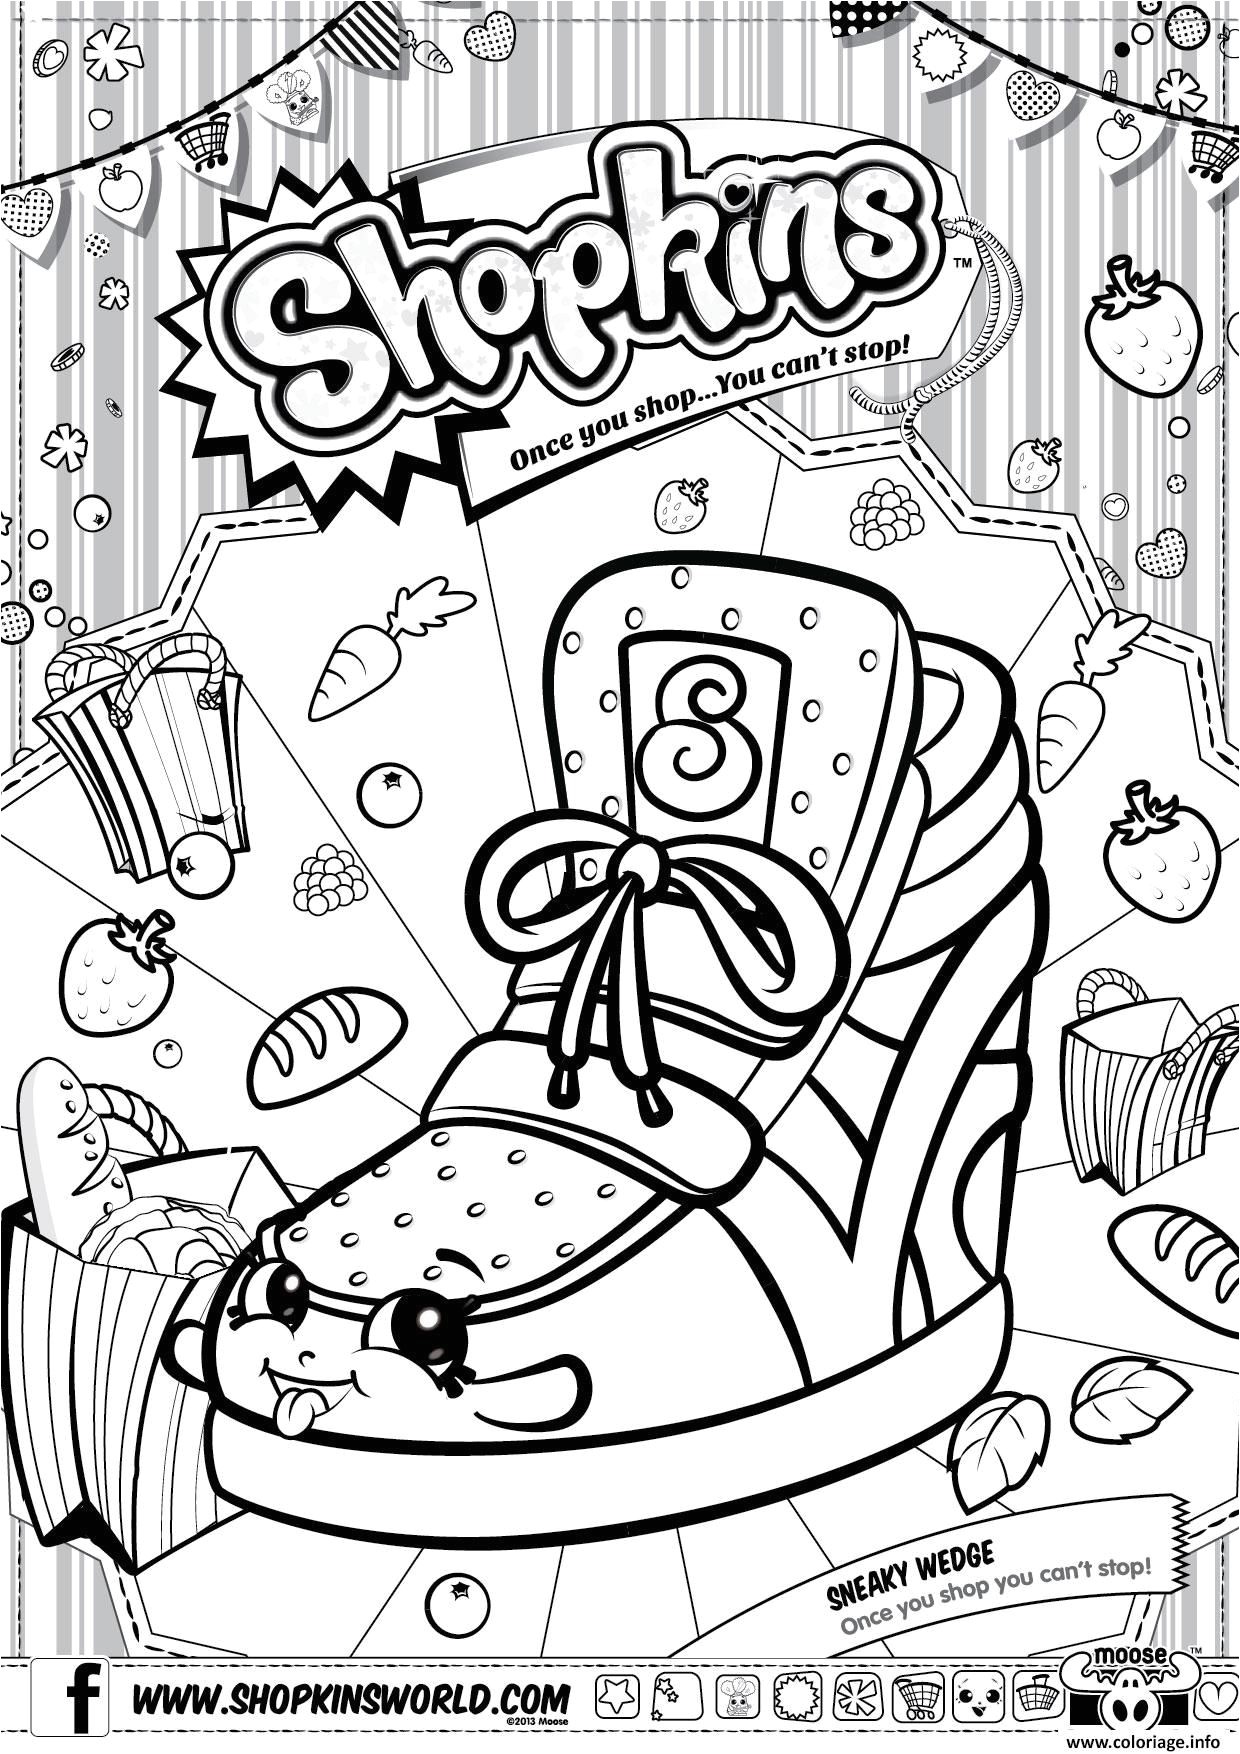 Coloriage De Shopkins A Imprimer Pin by Kay Mynch On Coloring Pages Pinterest